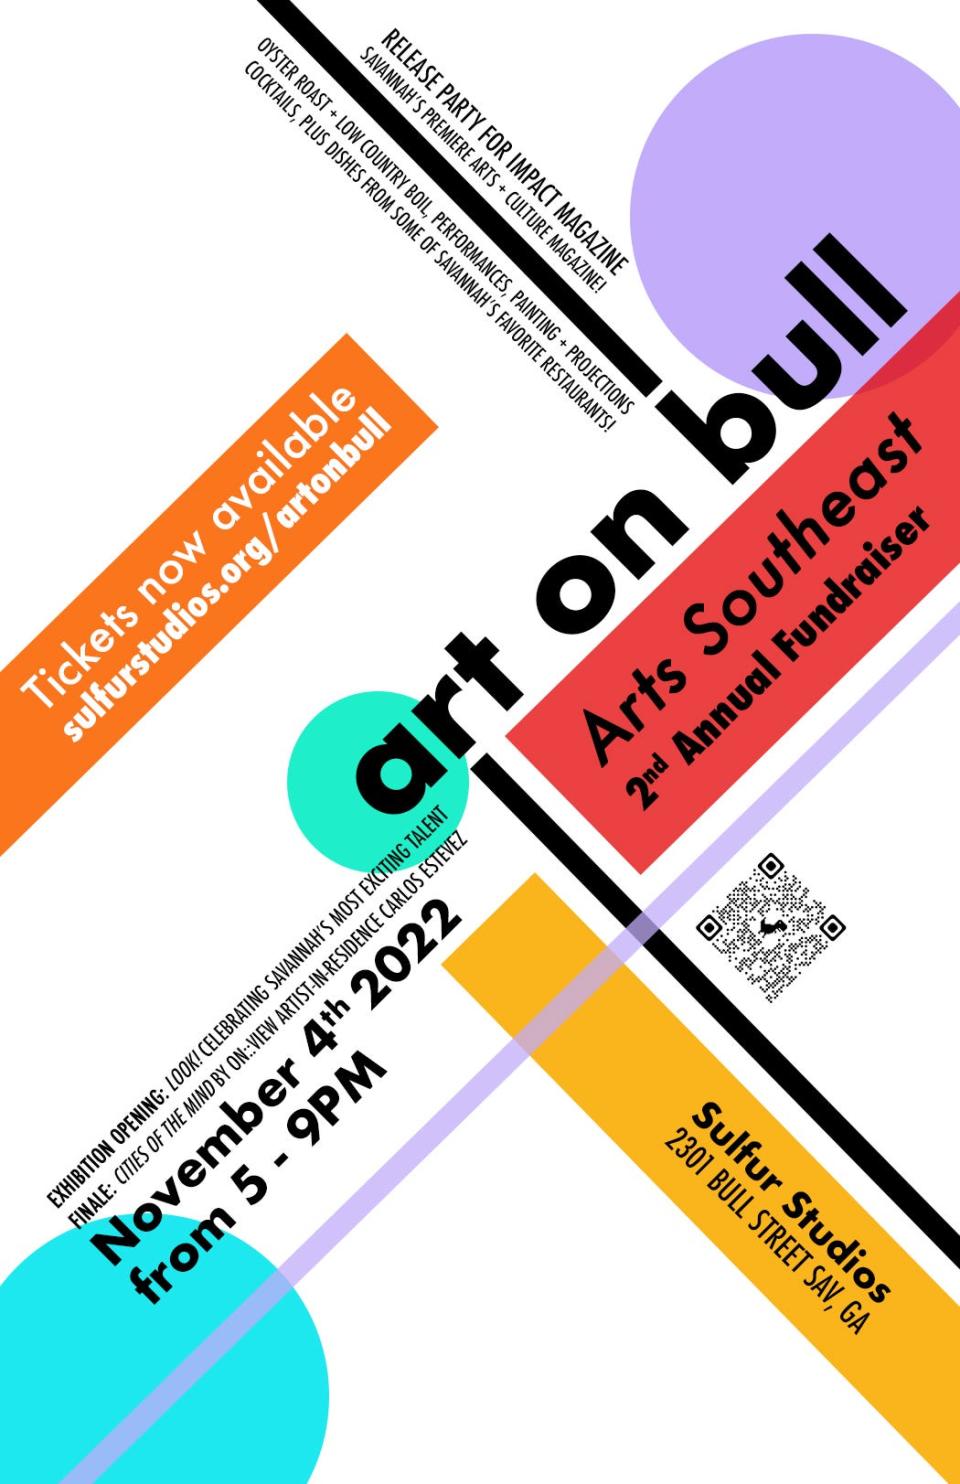 Art on Bull takes place at Sulfur Studios in Savannah's Starland District on Friday from 5-9 p.m.